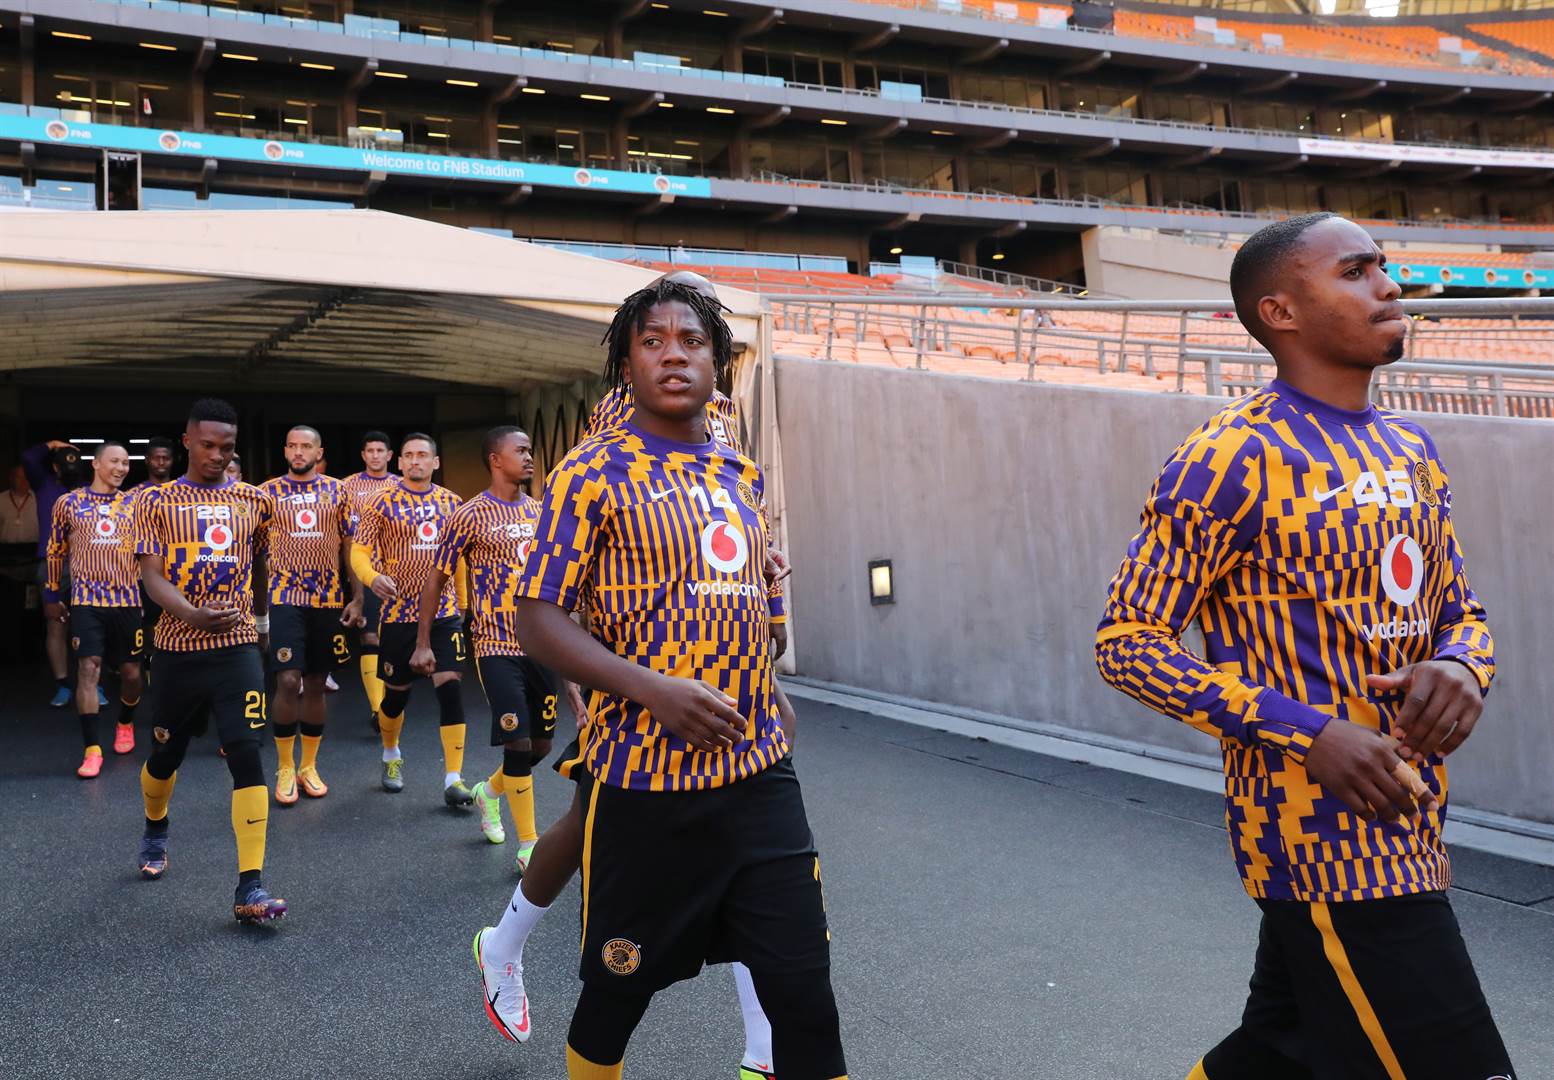 Scroll through the gallery to see Kaizer Chiefs' m